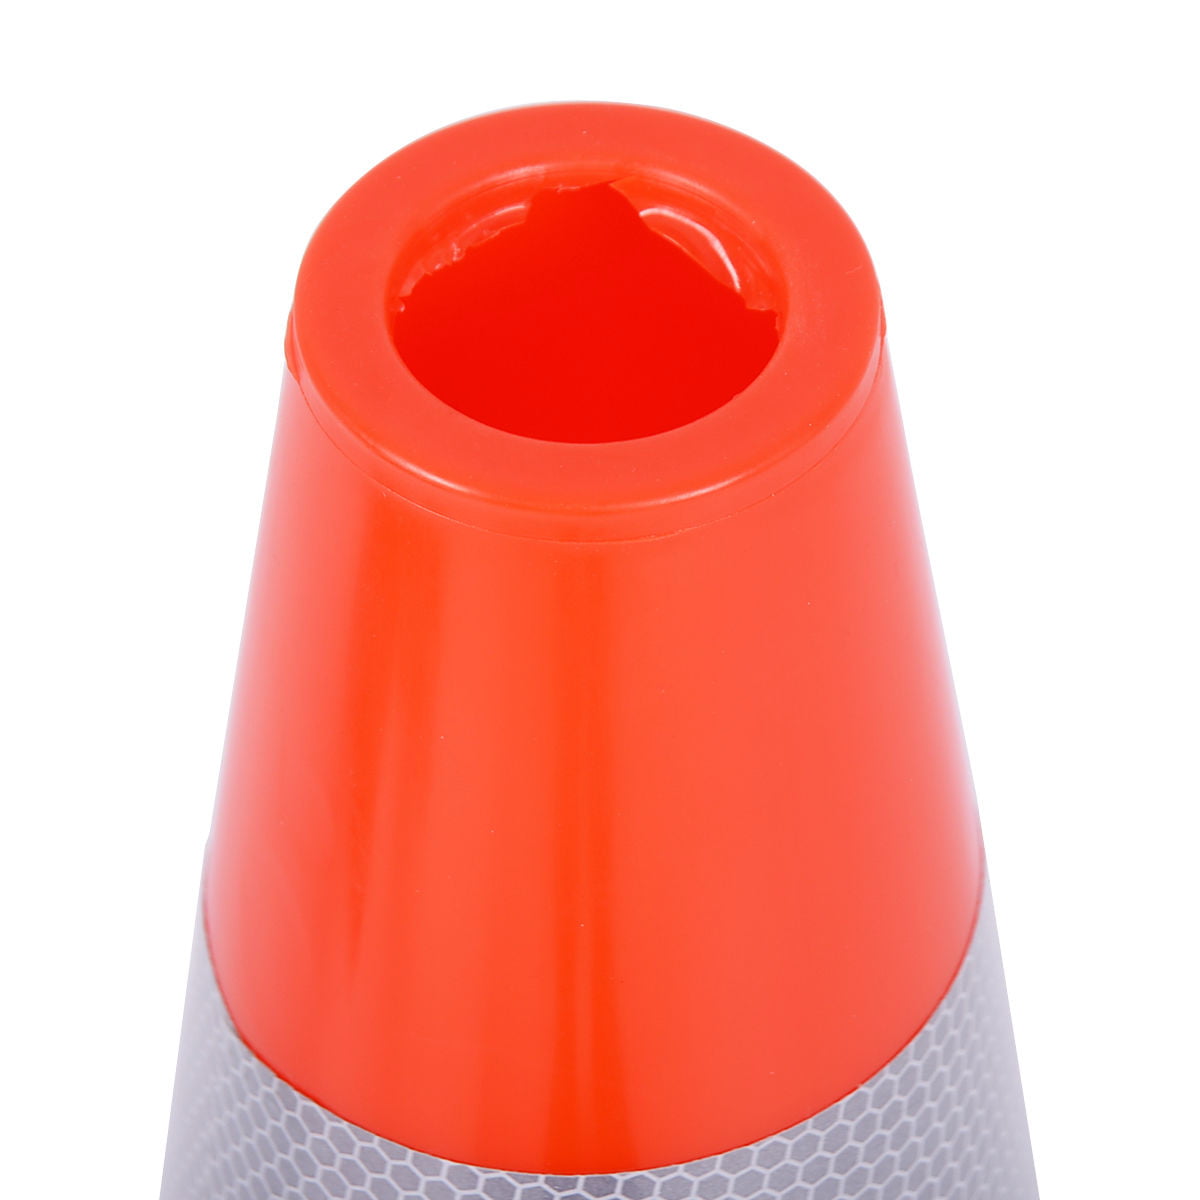 5Pcs Traffic Cones 18" Slim Fluorescent Reflective Road Safety Parking Cones 